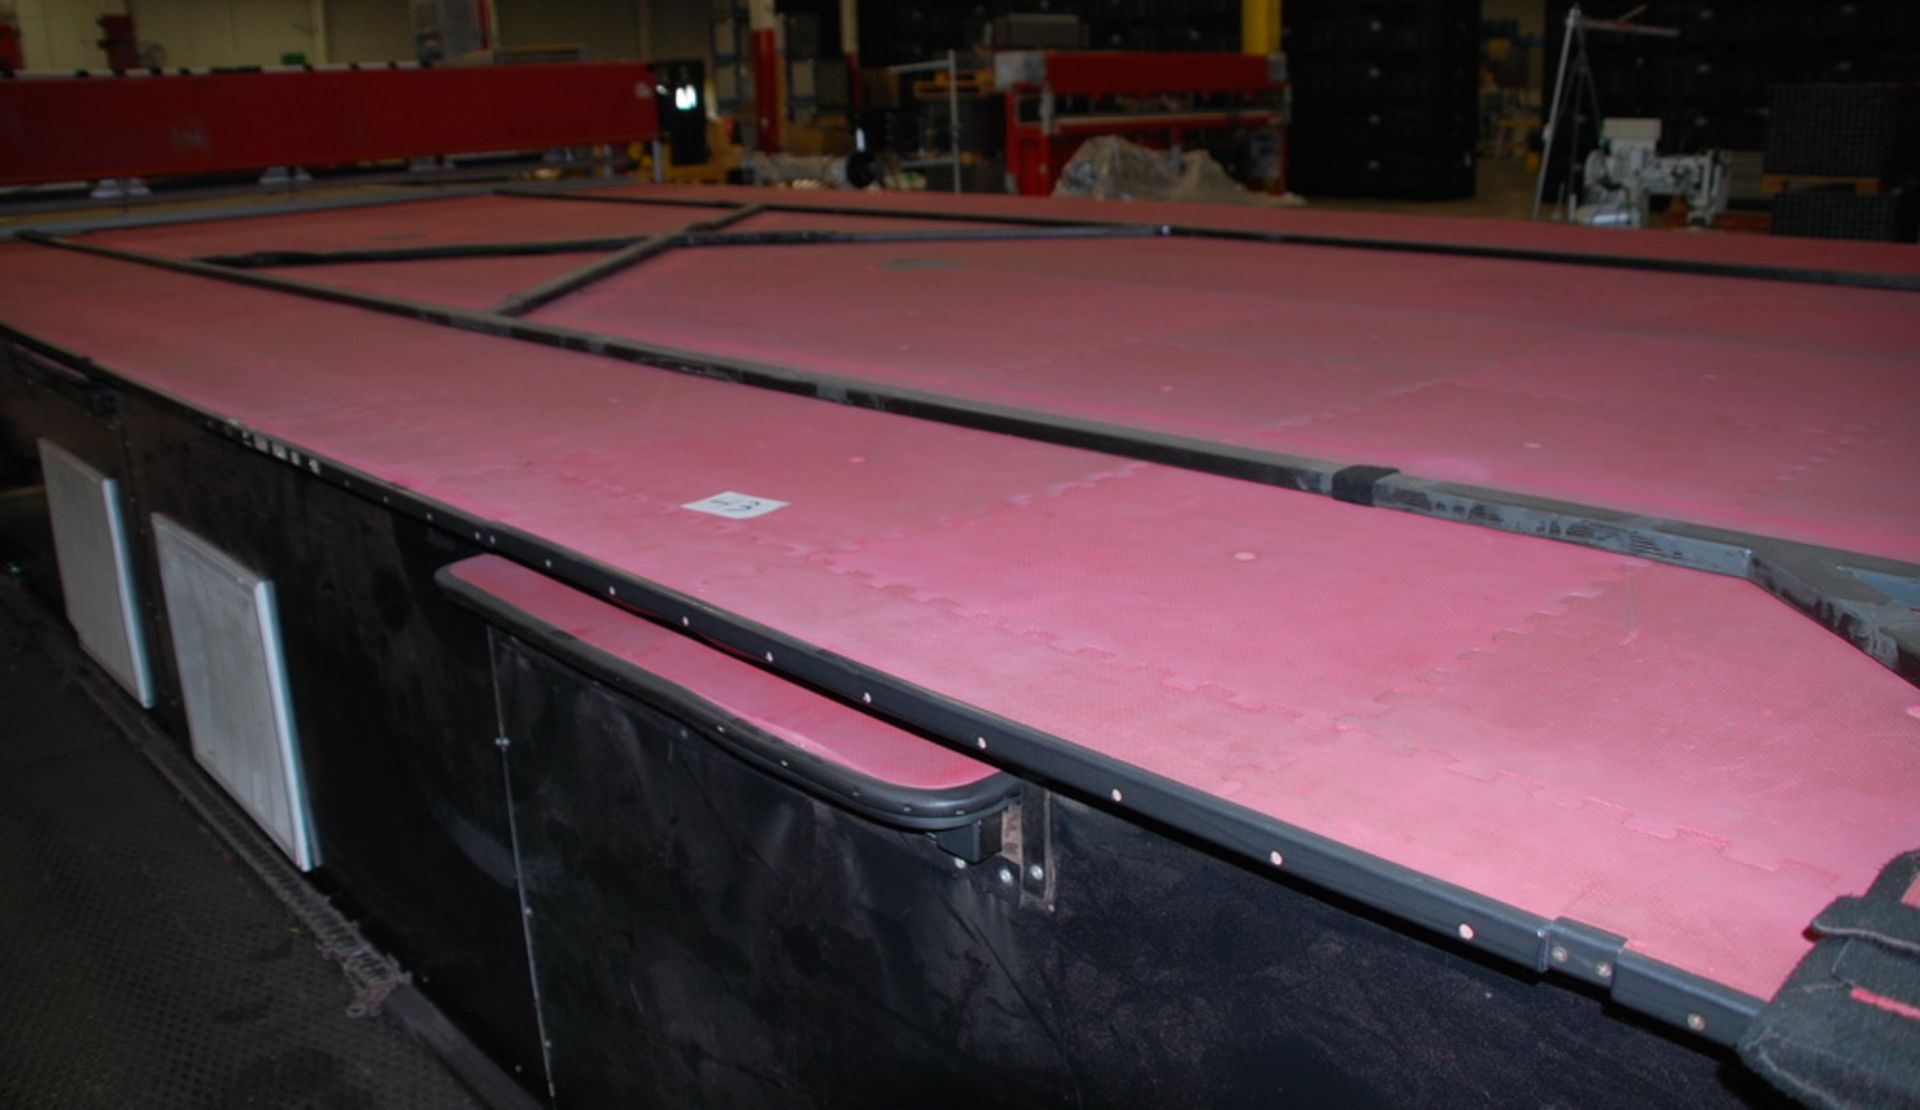 Assembly Table 24' long x 13' wide, has laser target above and pneumatic clamp